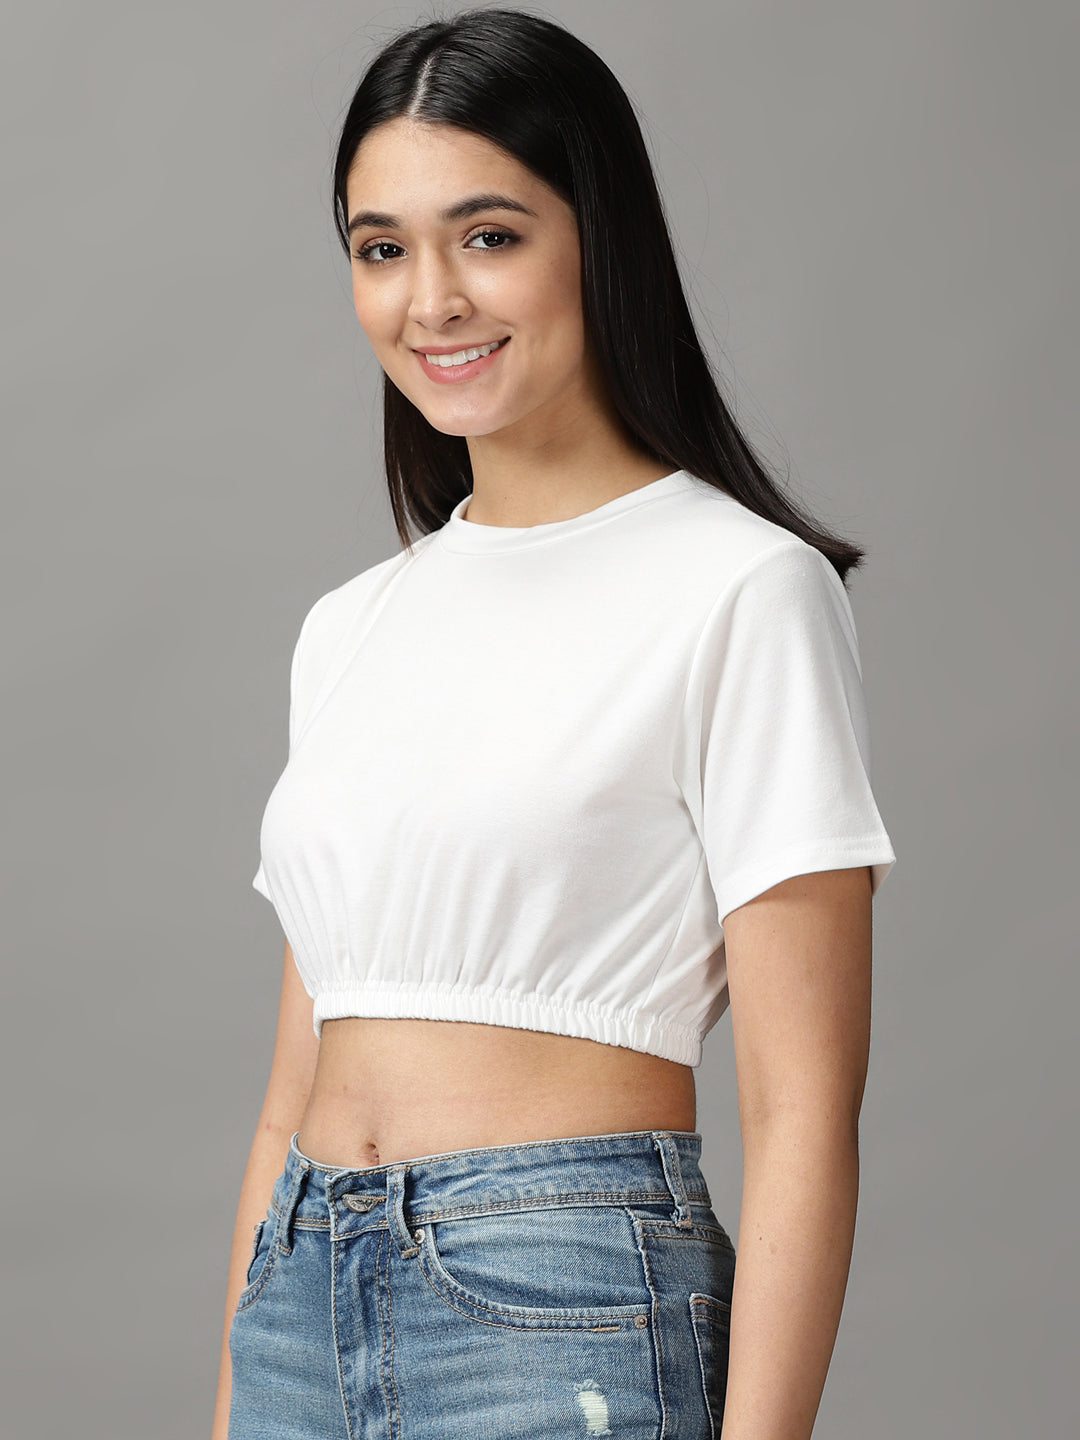 Women's White Solid Cinched Waist Crop Top